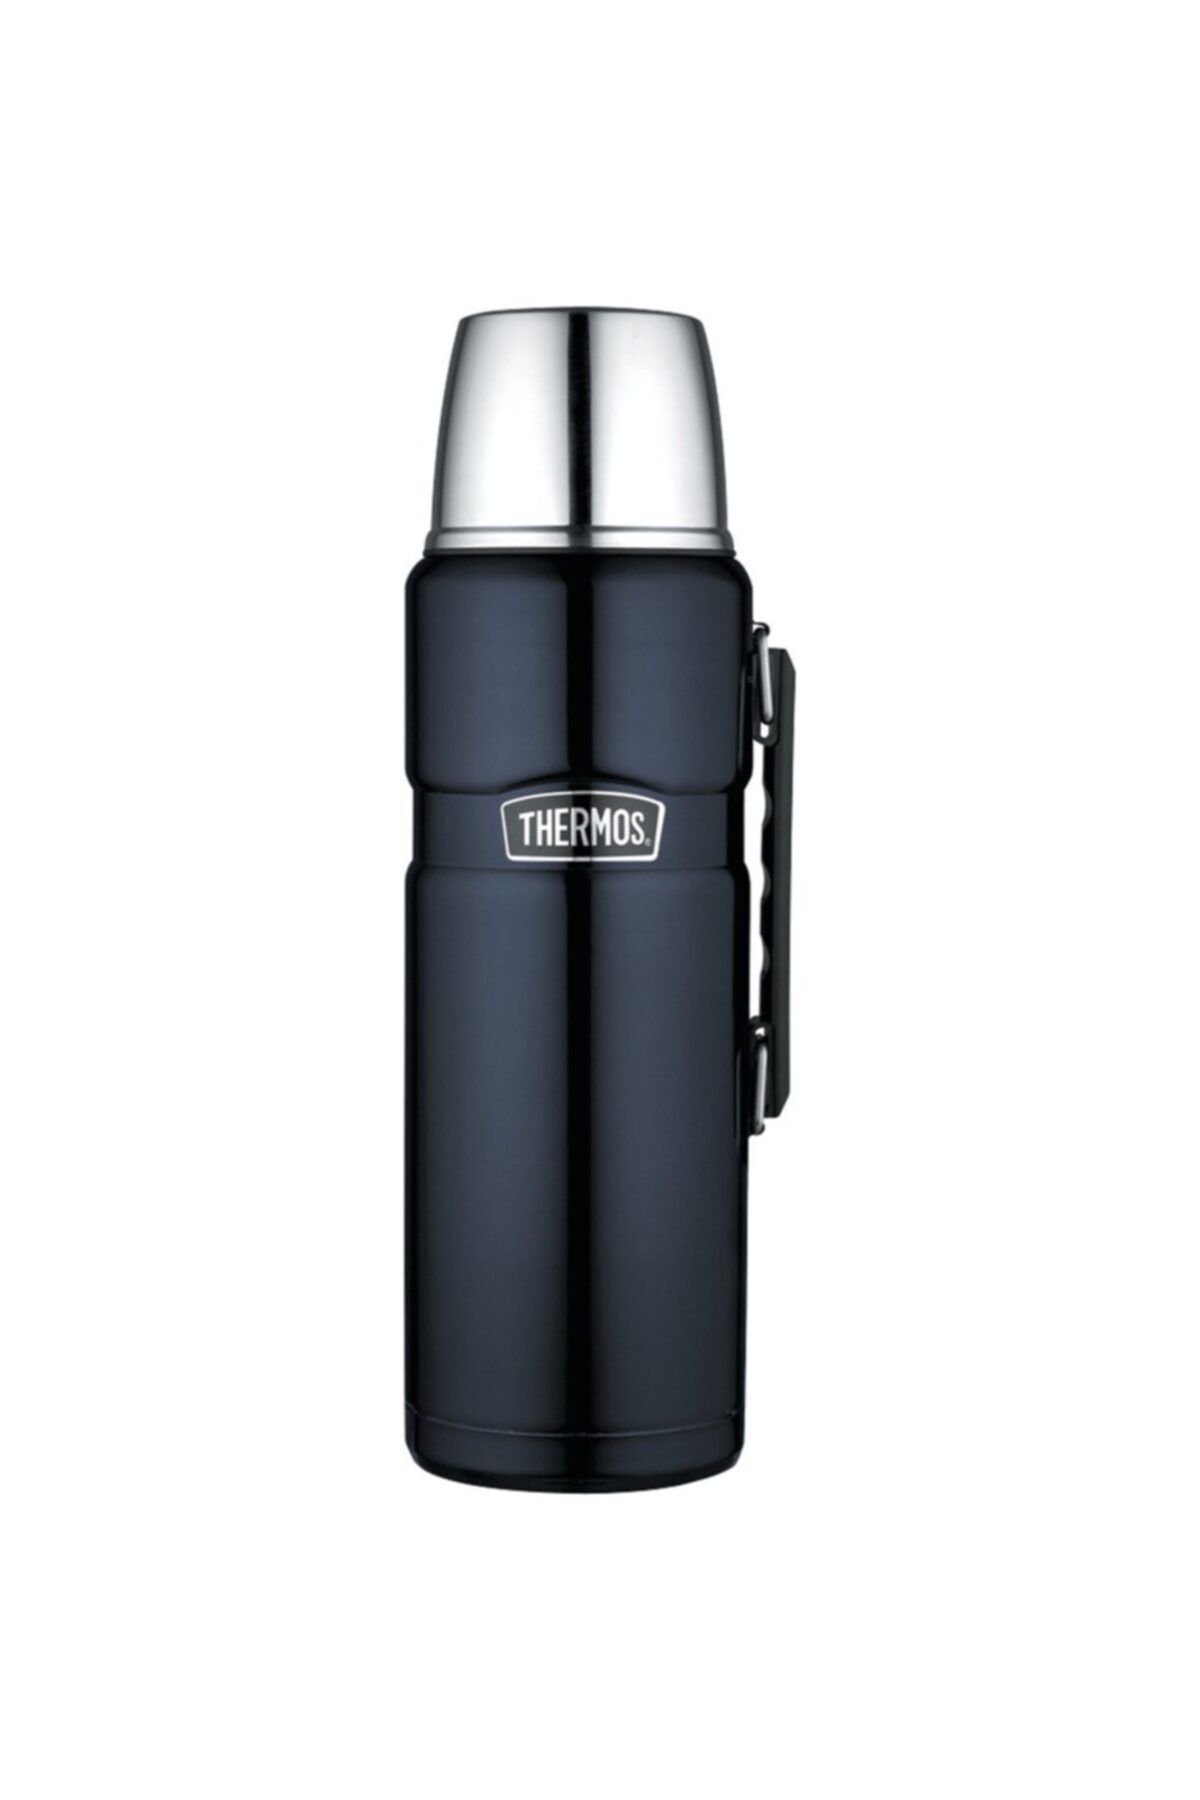 Thermos SK 2020 Stainles King X Large 2 Lt Termos Midnight Blue